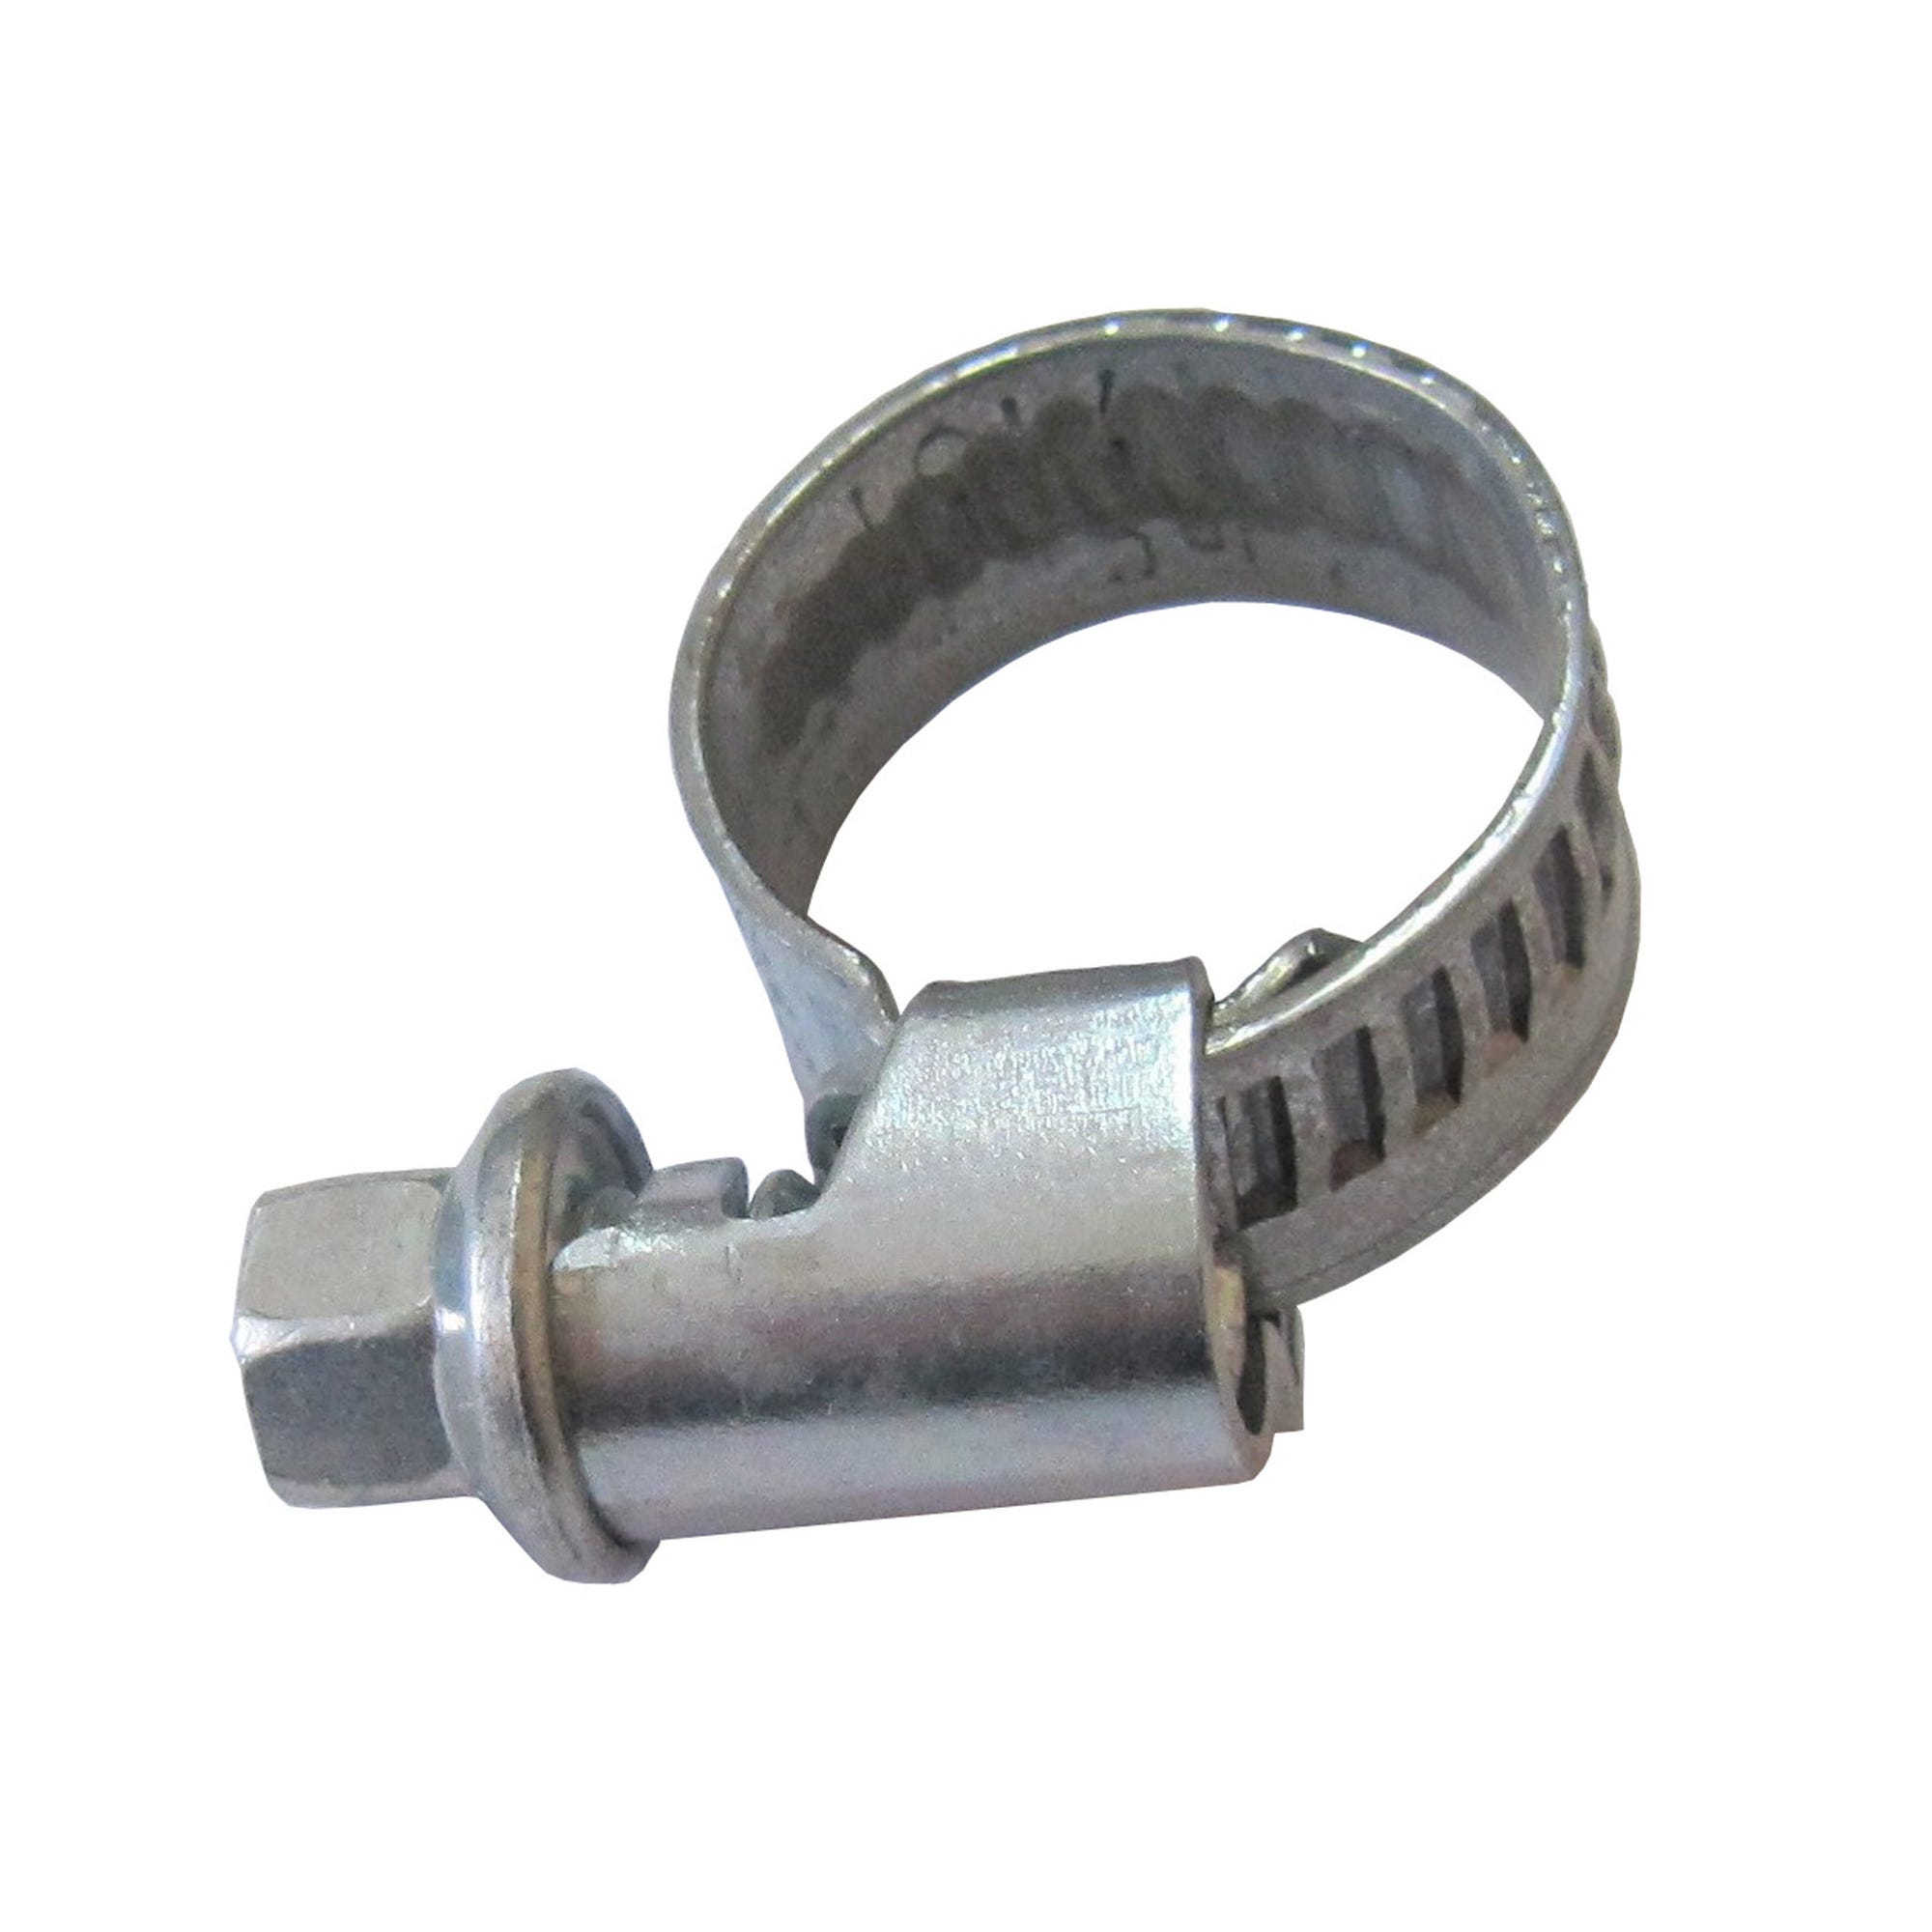 10 colliers inox d.16 a 27mm lg 9 mm 0